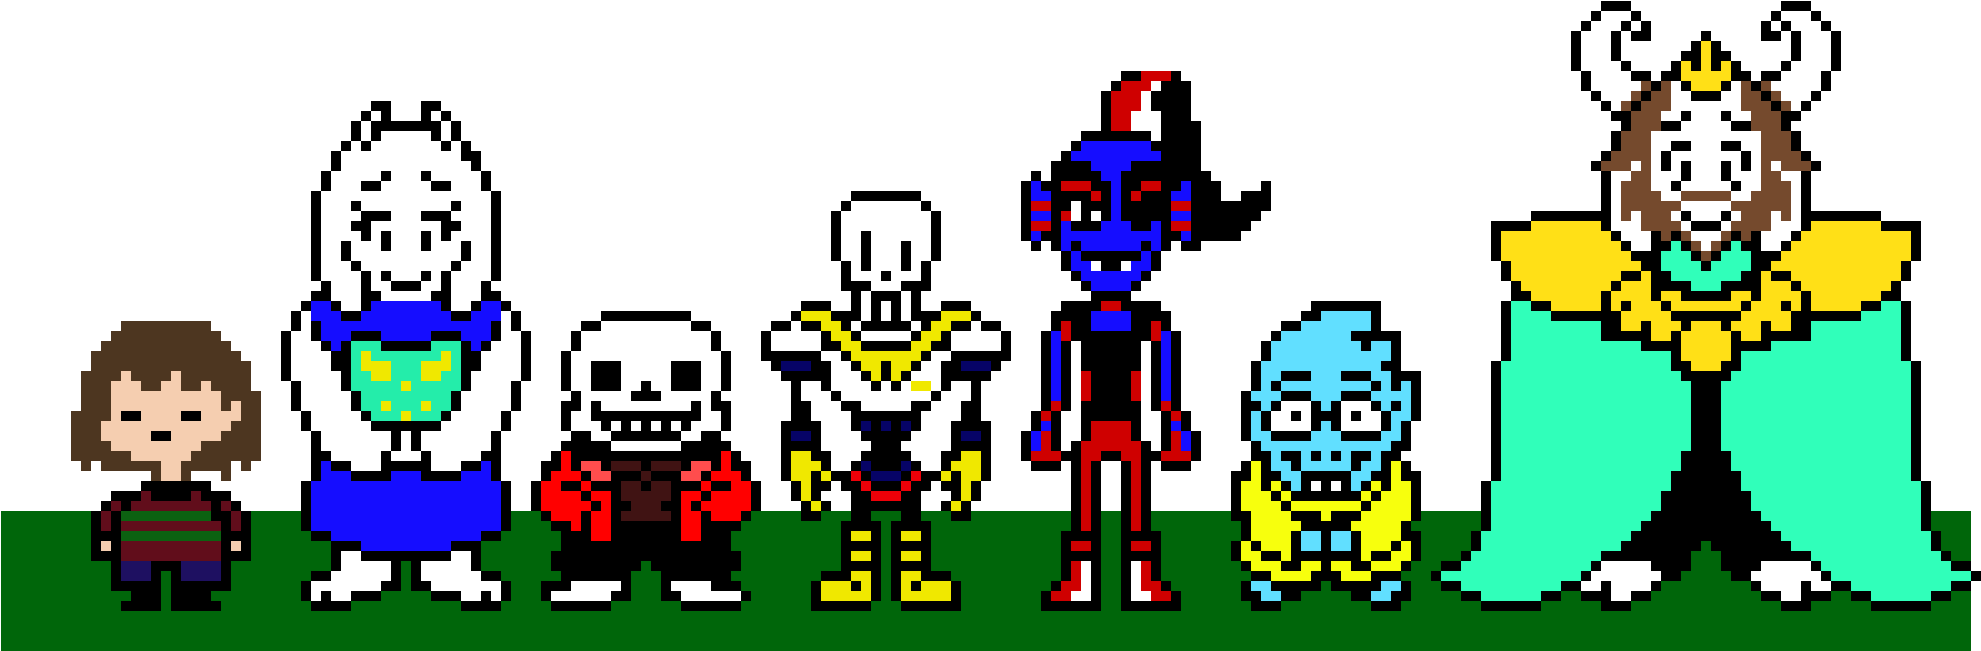 Download Undertale Family - Undertale Photo Pixel Family PNG Image with ...